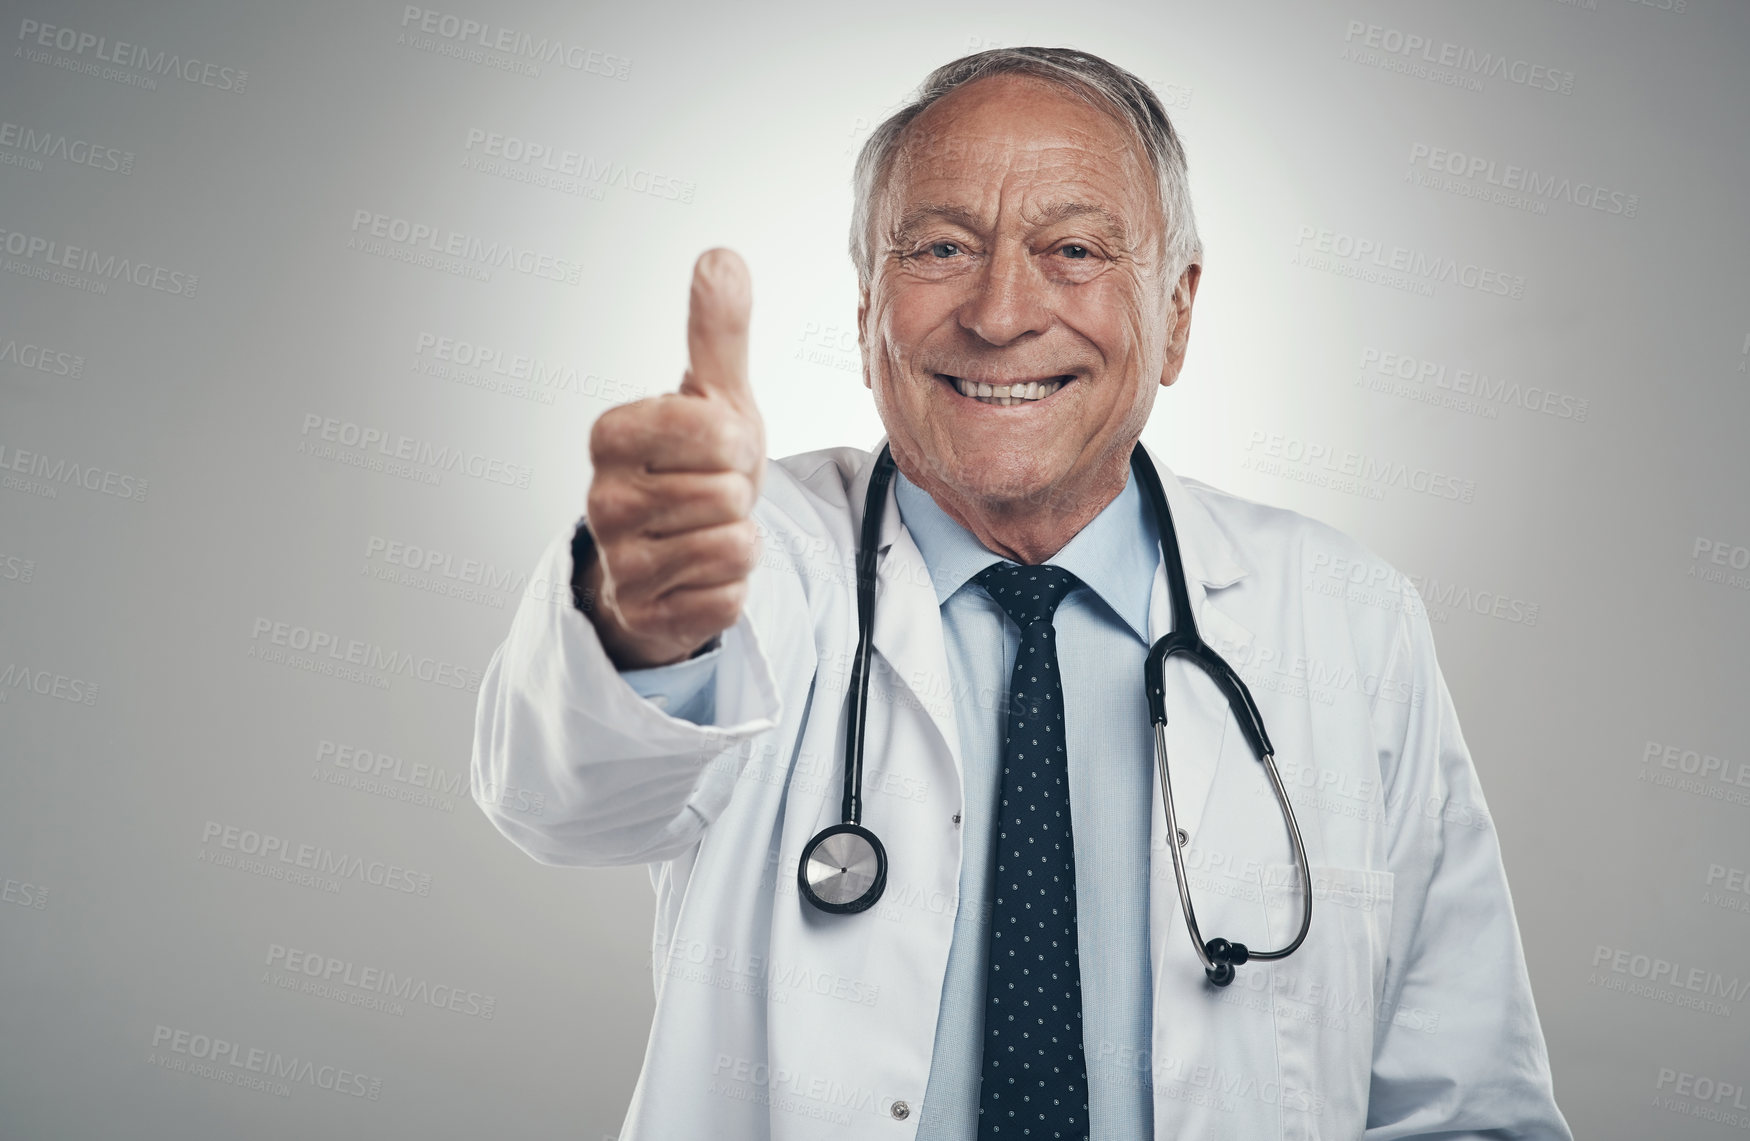 Buy stock photo Shot of an elderly male doctor in a studio giving a thumbs up against a grey background